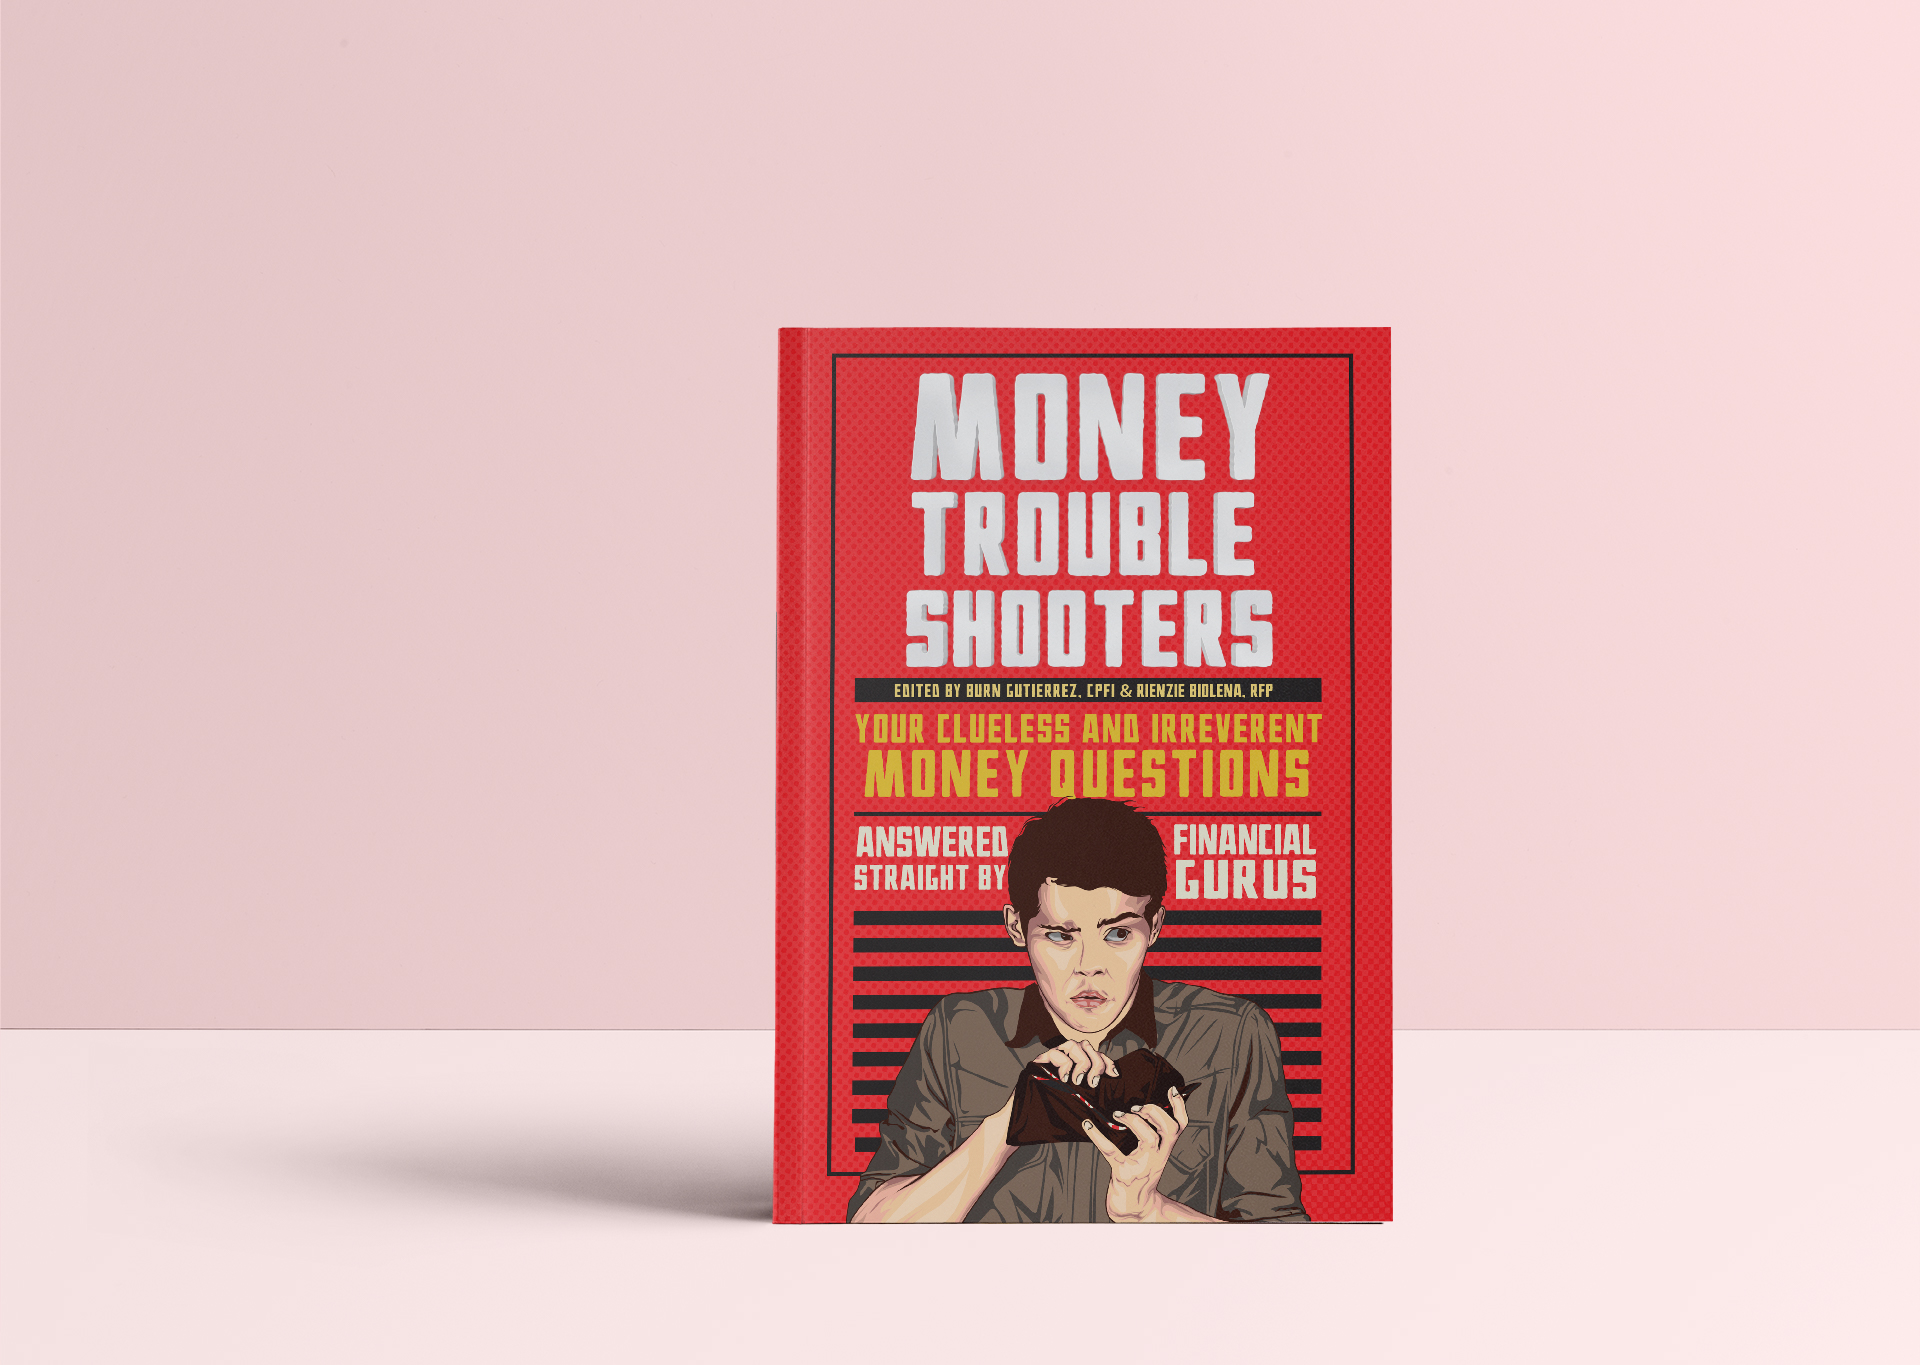 Money Trouble Shooters